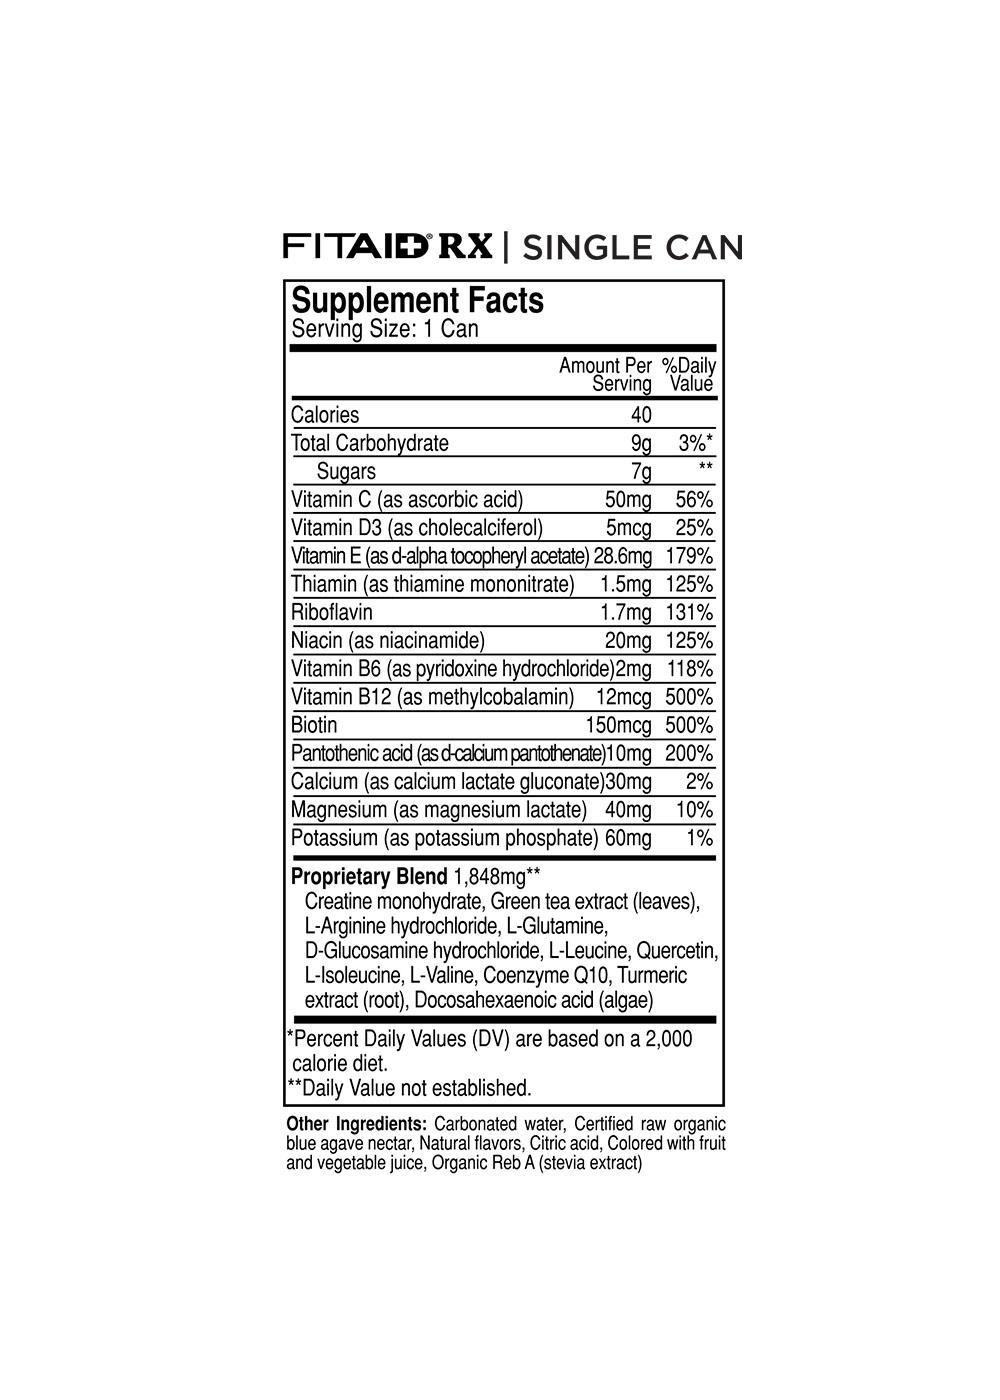 LIFEAID FITAID RX Recovery Blend + Creatine Supplement Beverage; image 2 of 2